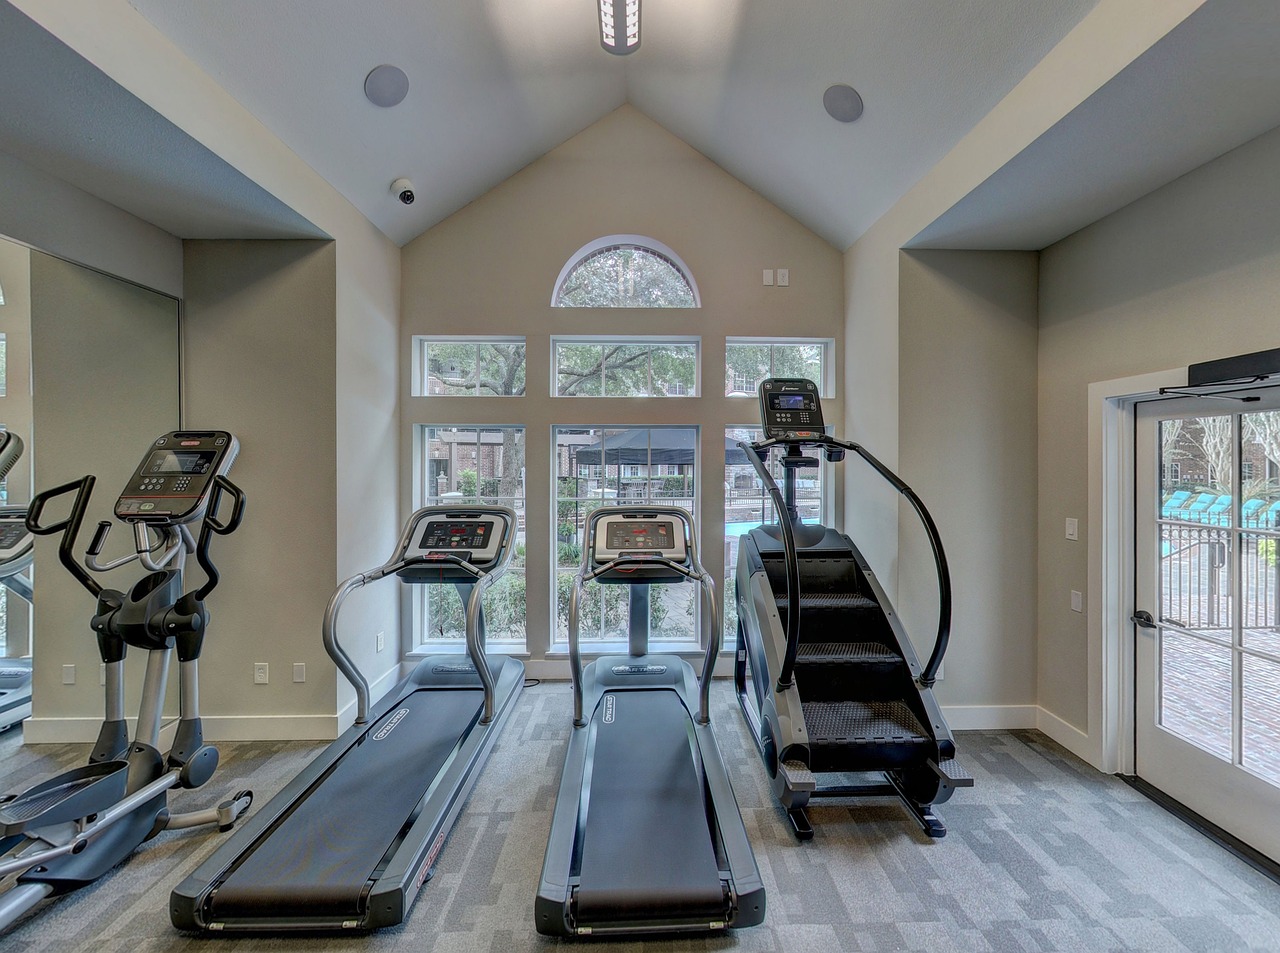 A gym with tread machines and windows: Home gym with tread machines.